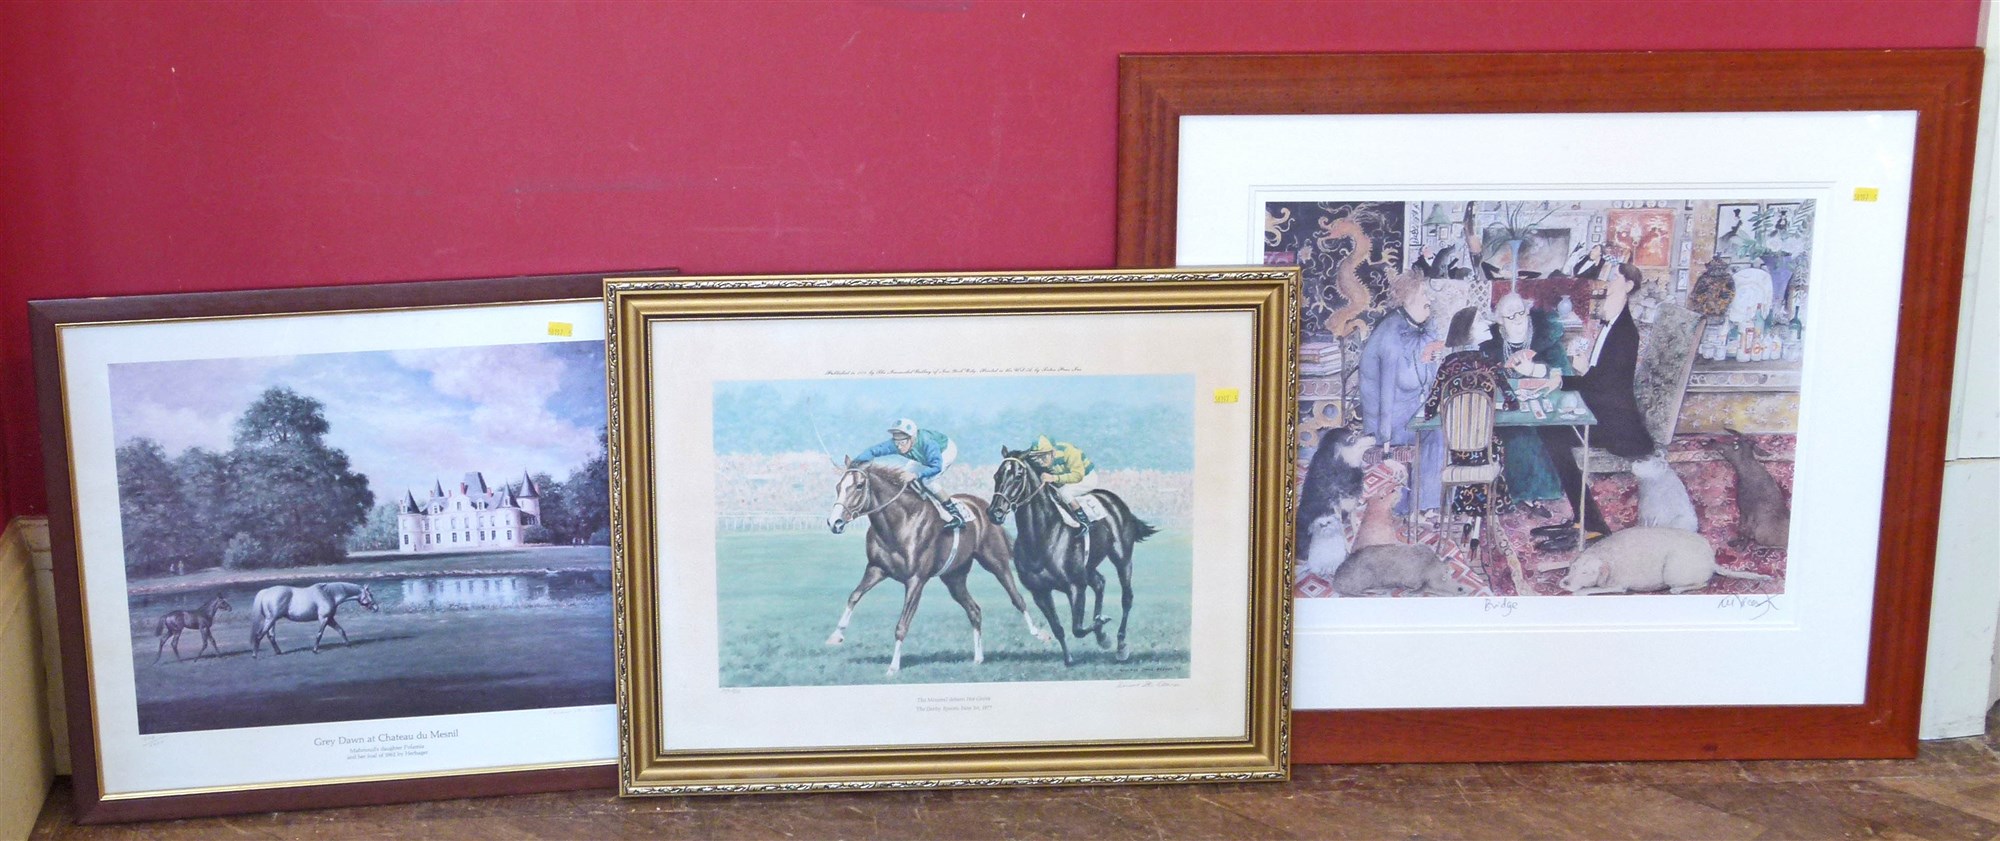 Sue Snape, 20th century- "Bridge" signed print and two more signed horse racing prints by Richard